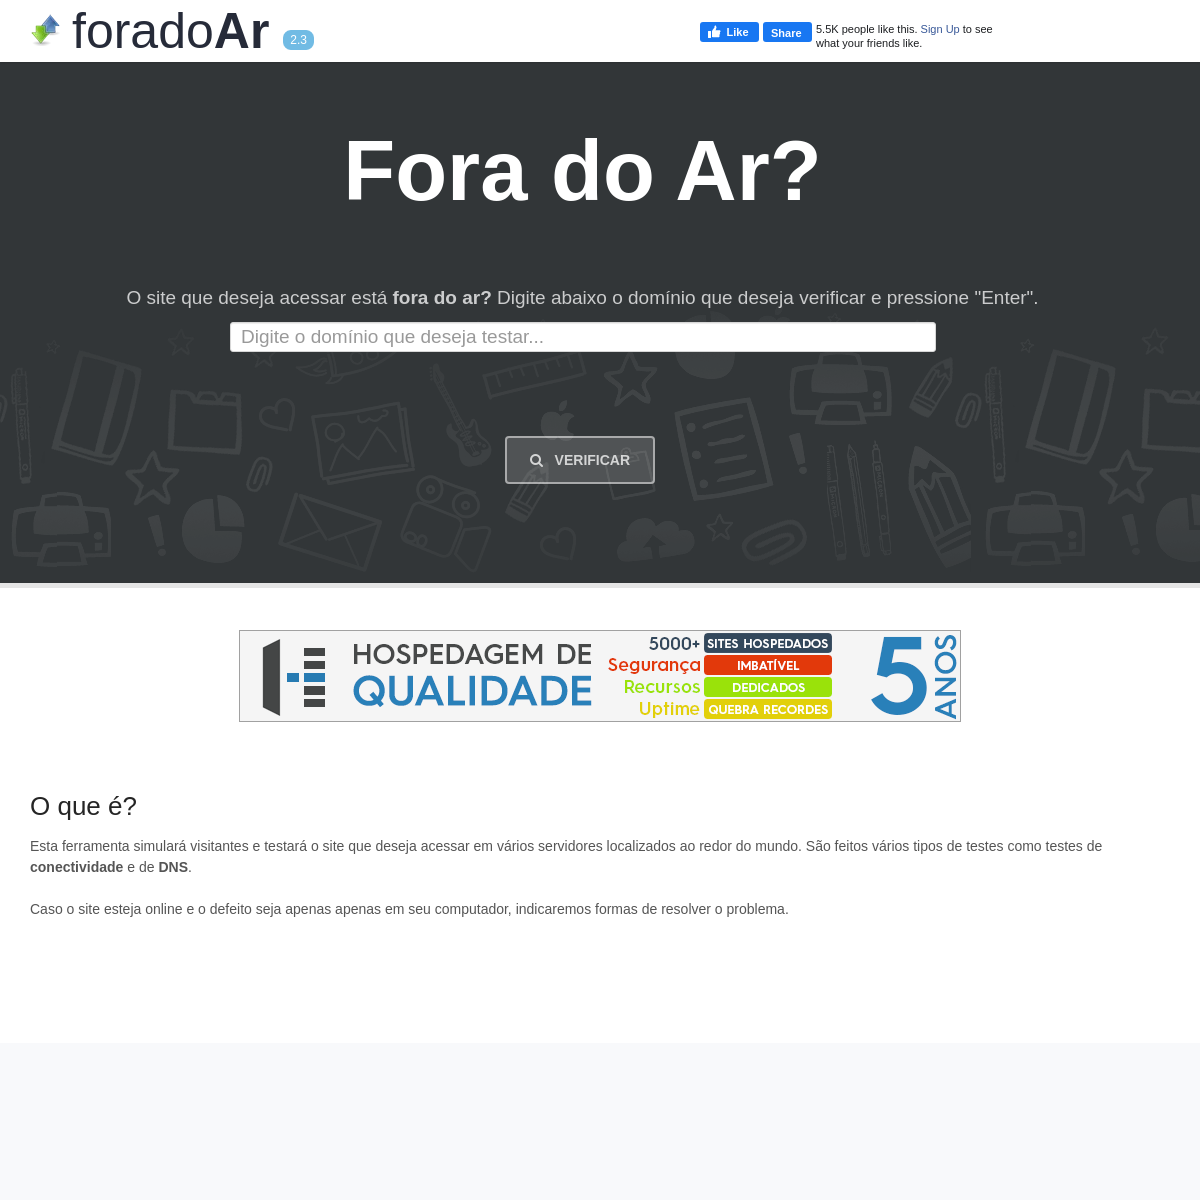 A complete backup of foradoar.org